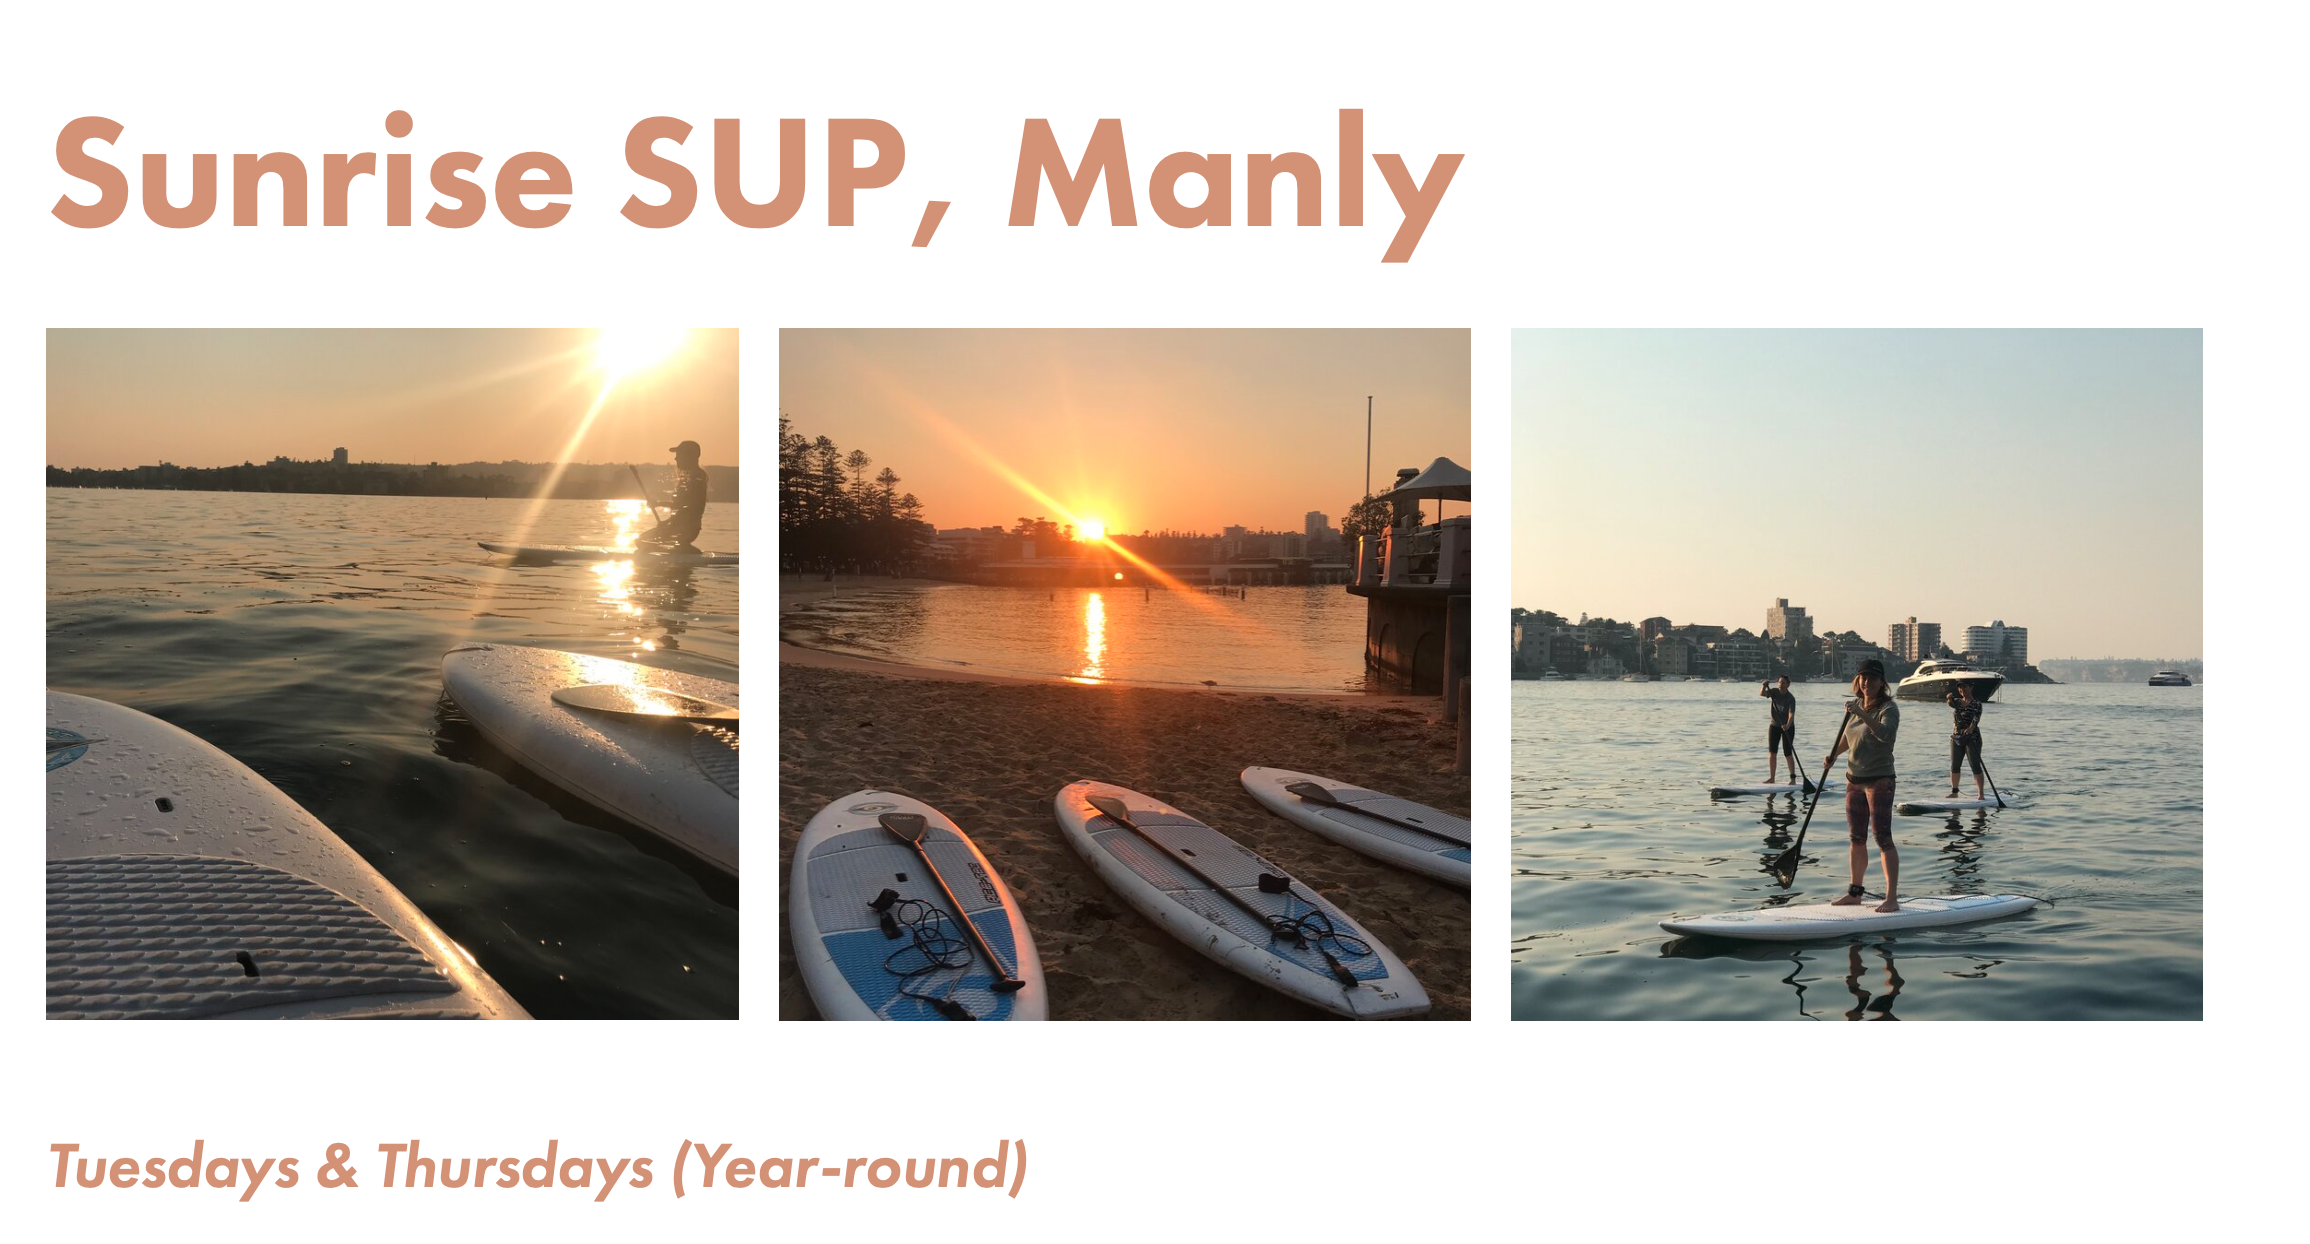 She SUPS Women’s Sunrise SUP Manly